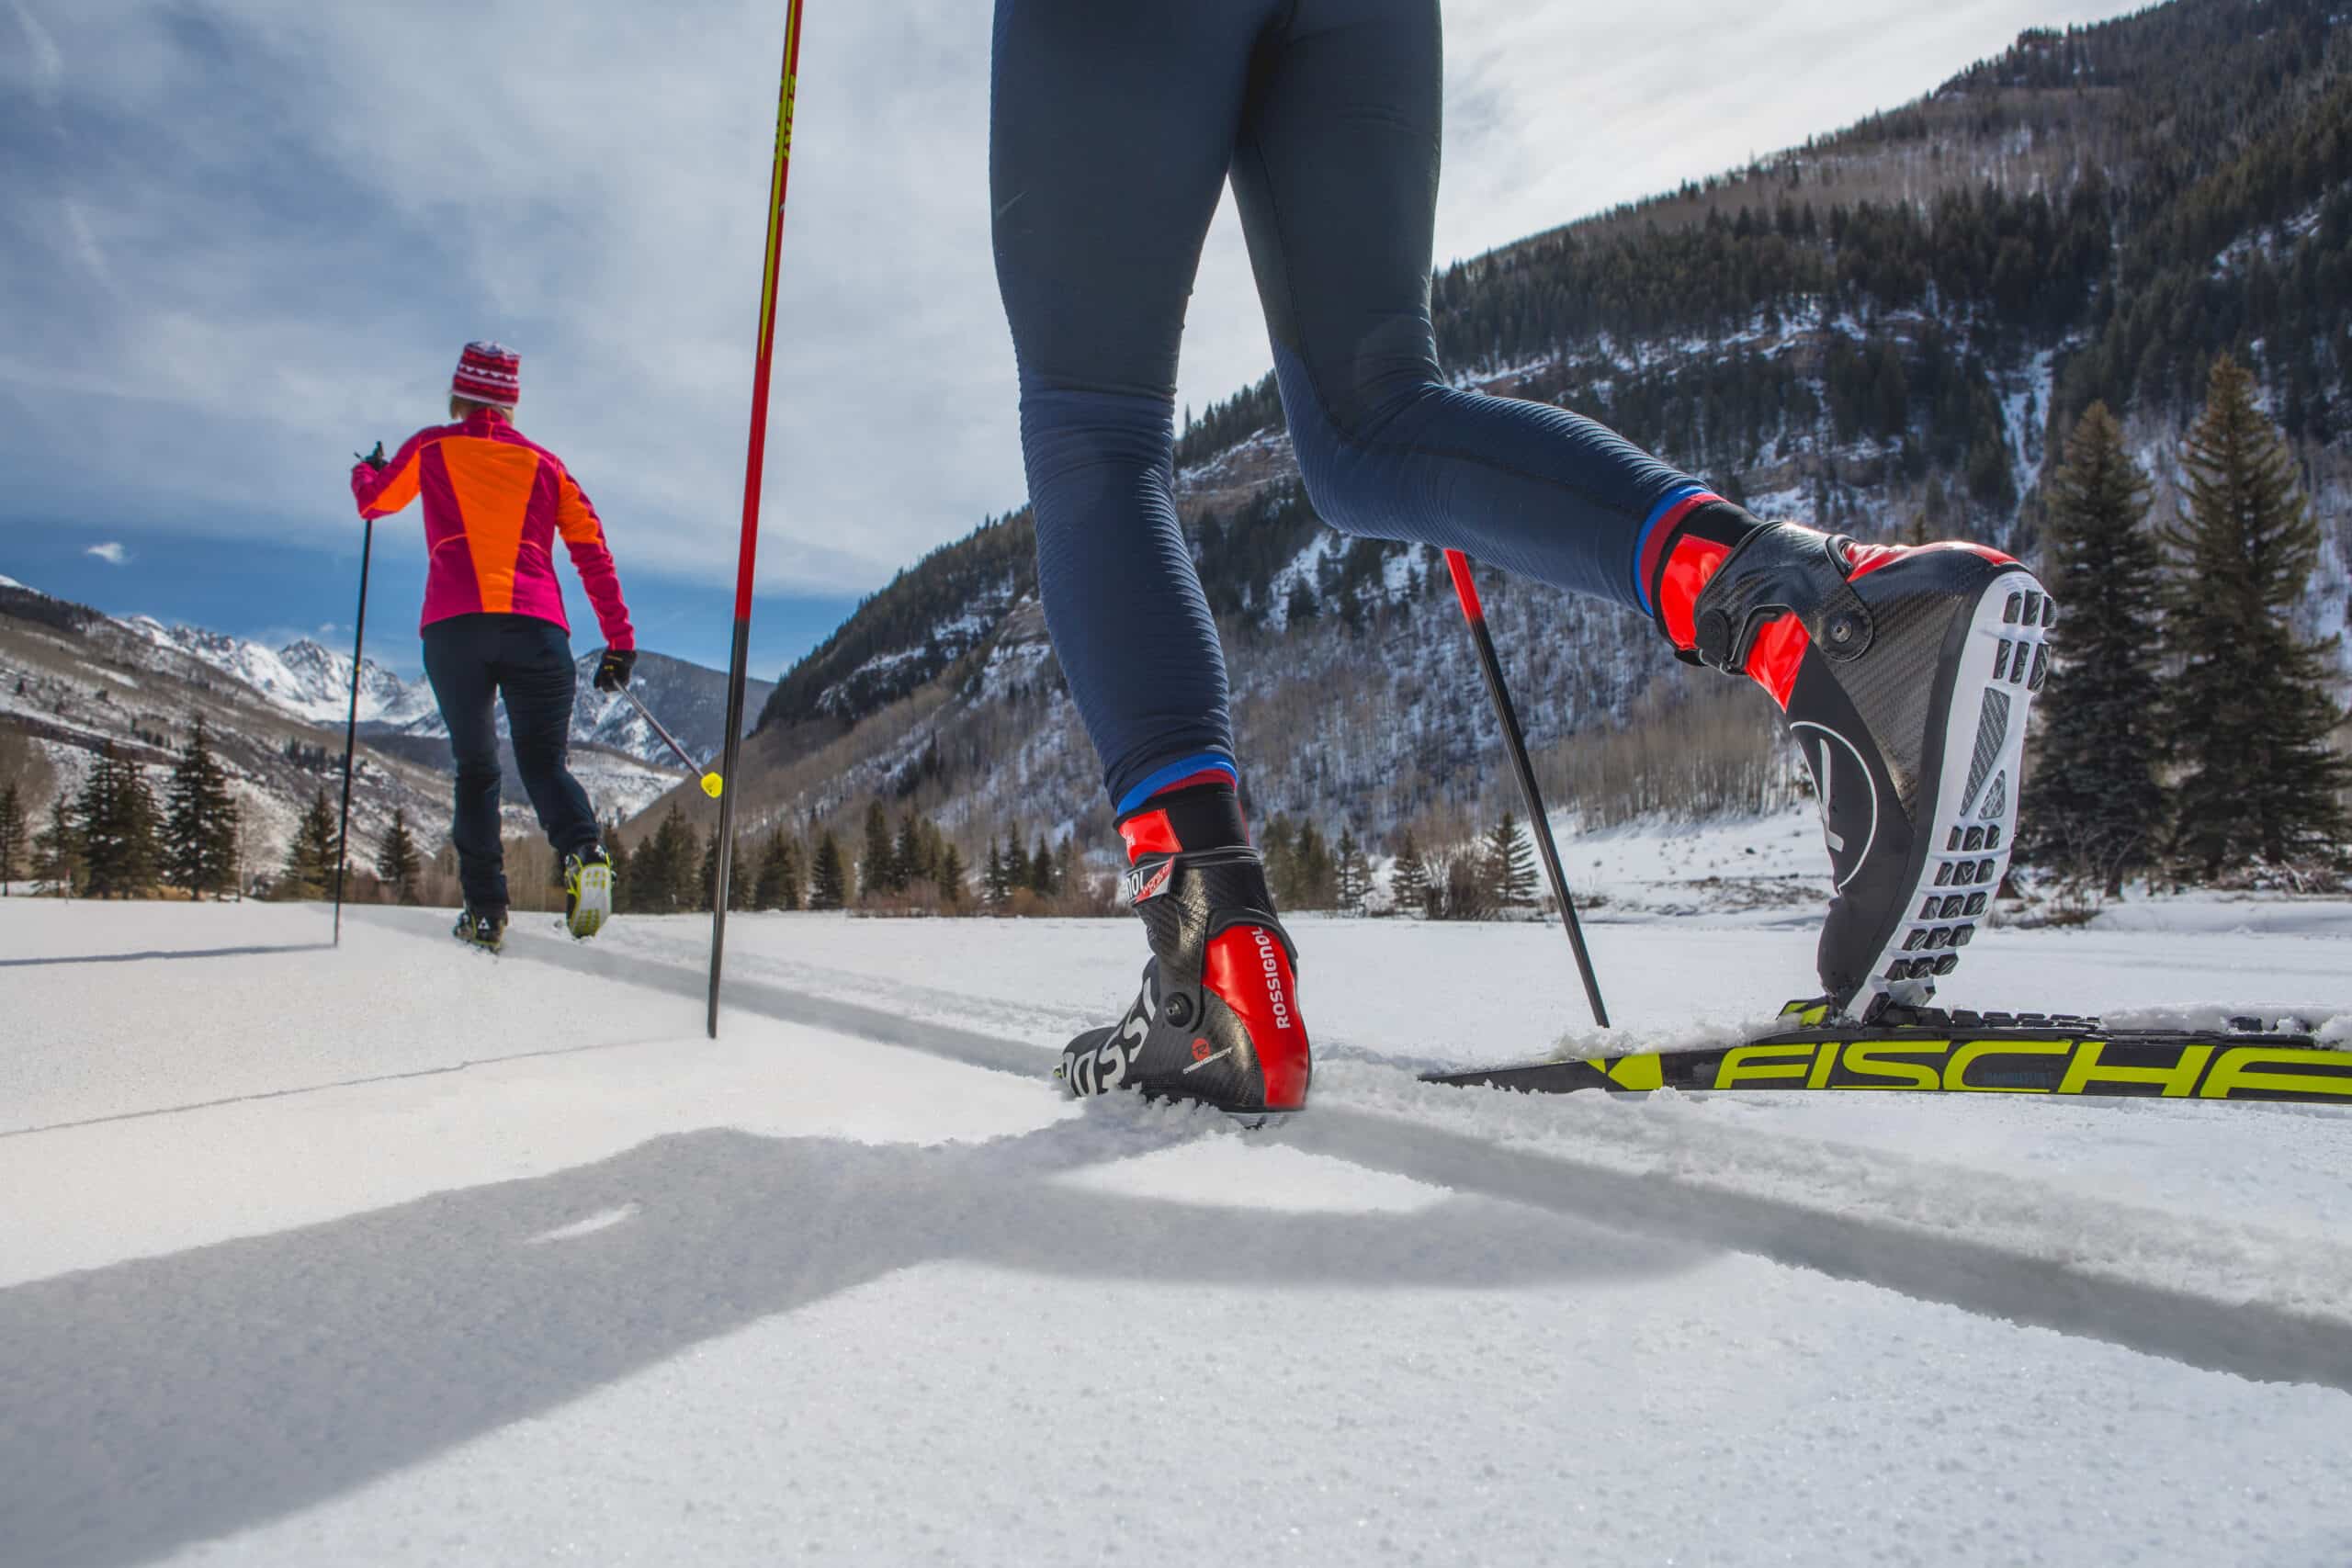 Two people cross-country ski through a Vail valley. The person in front wears an orange and maroon winter jacket.